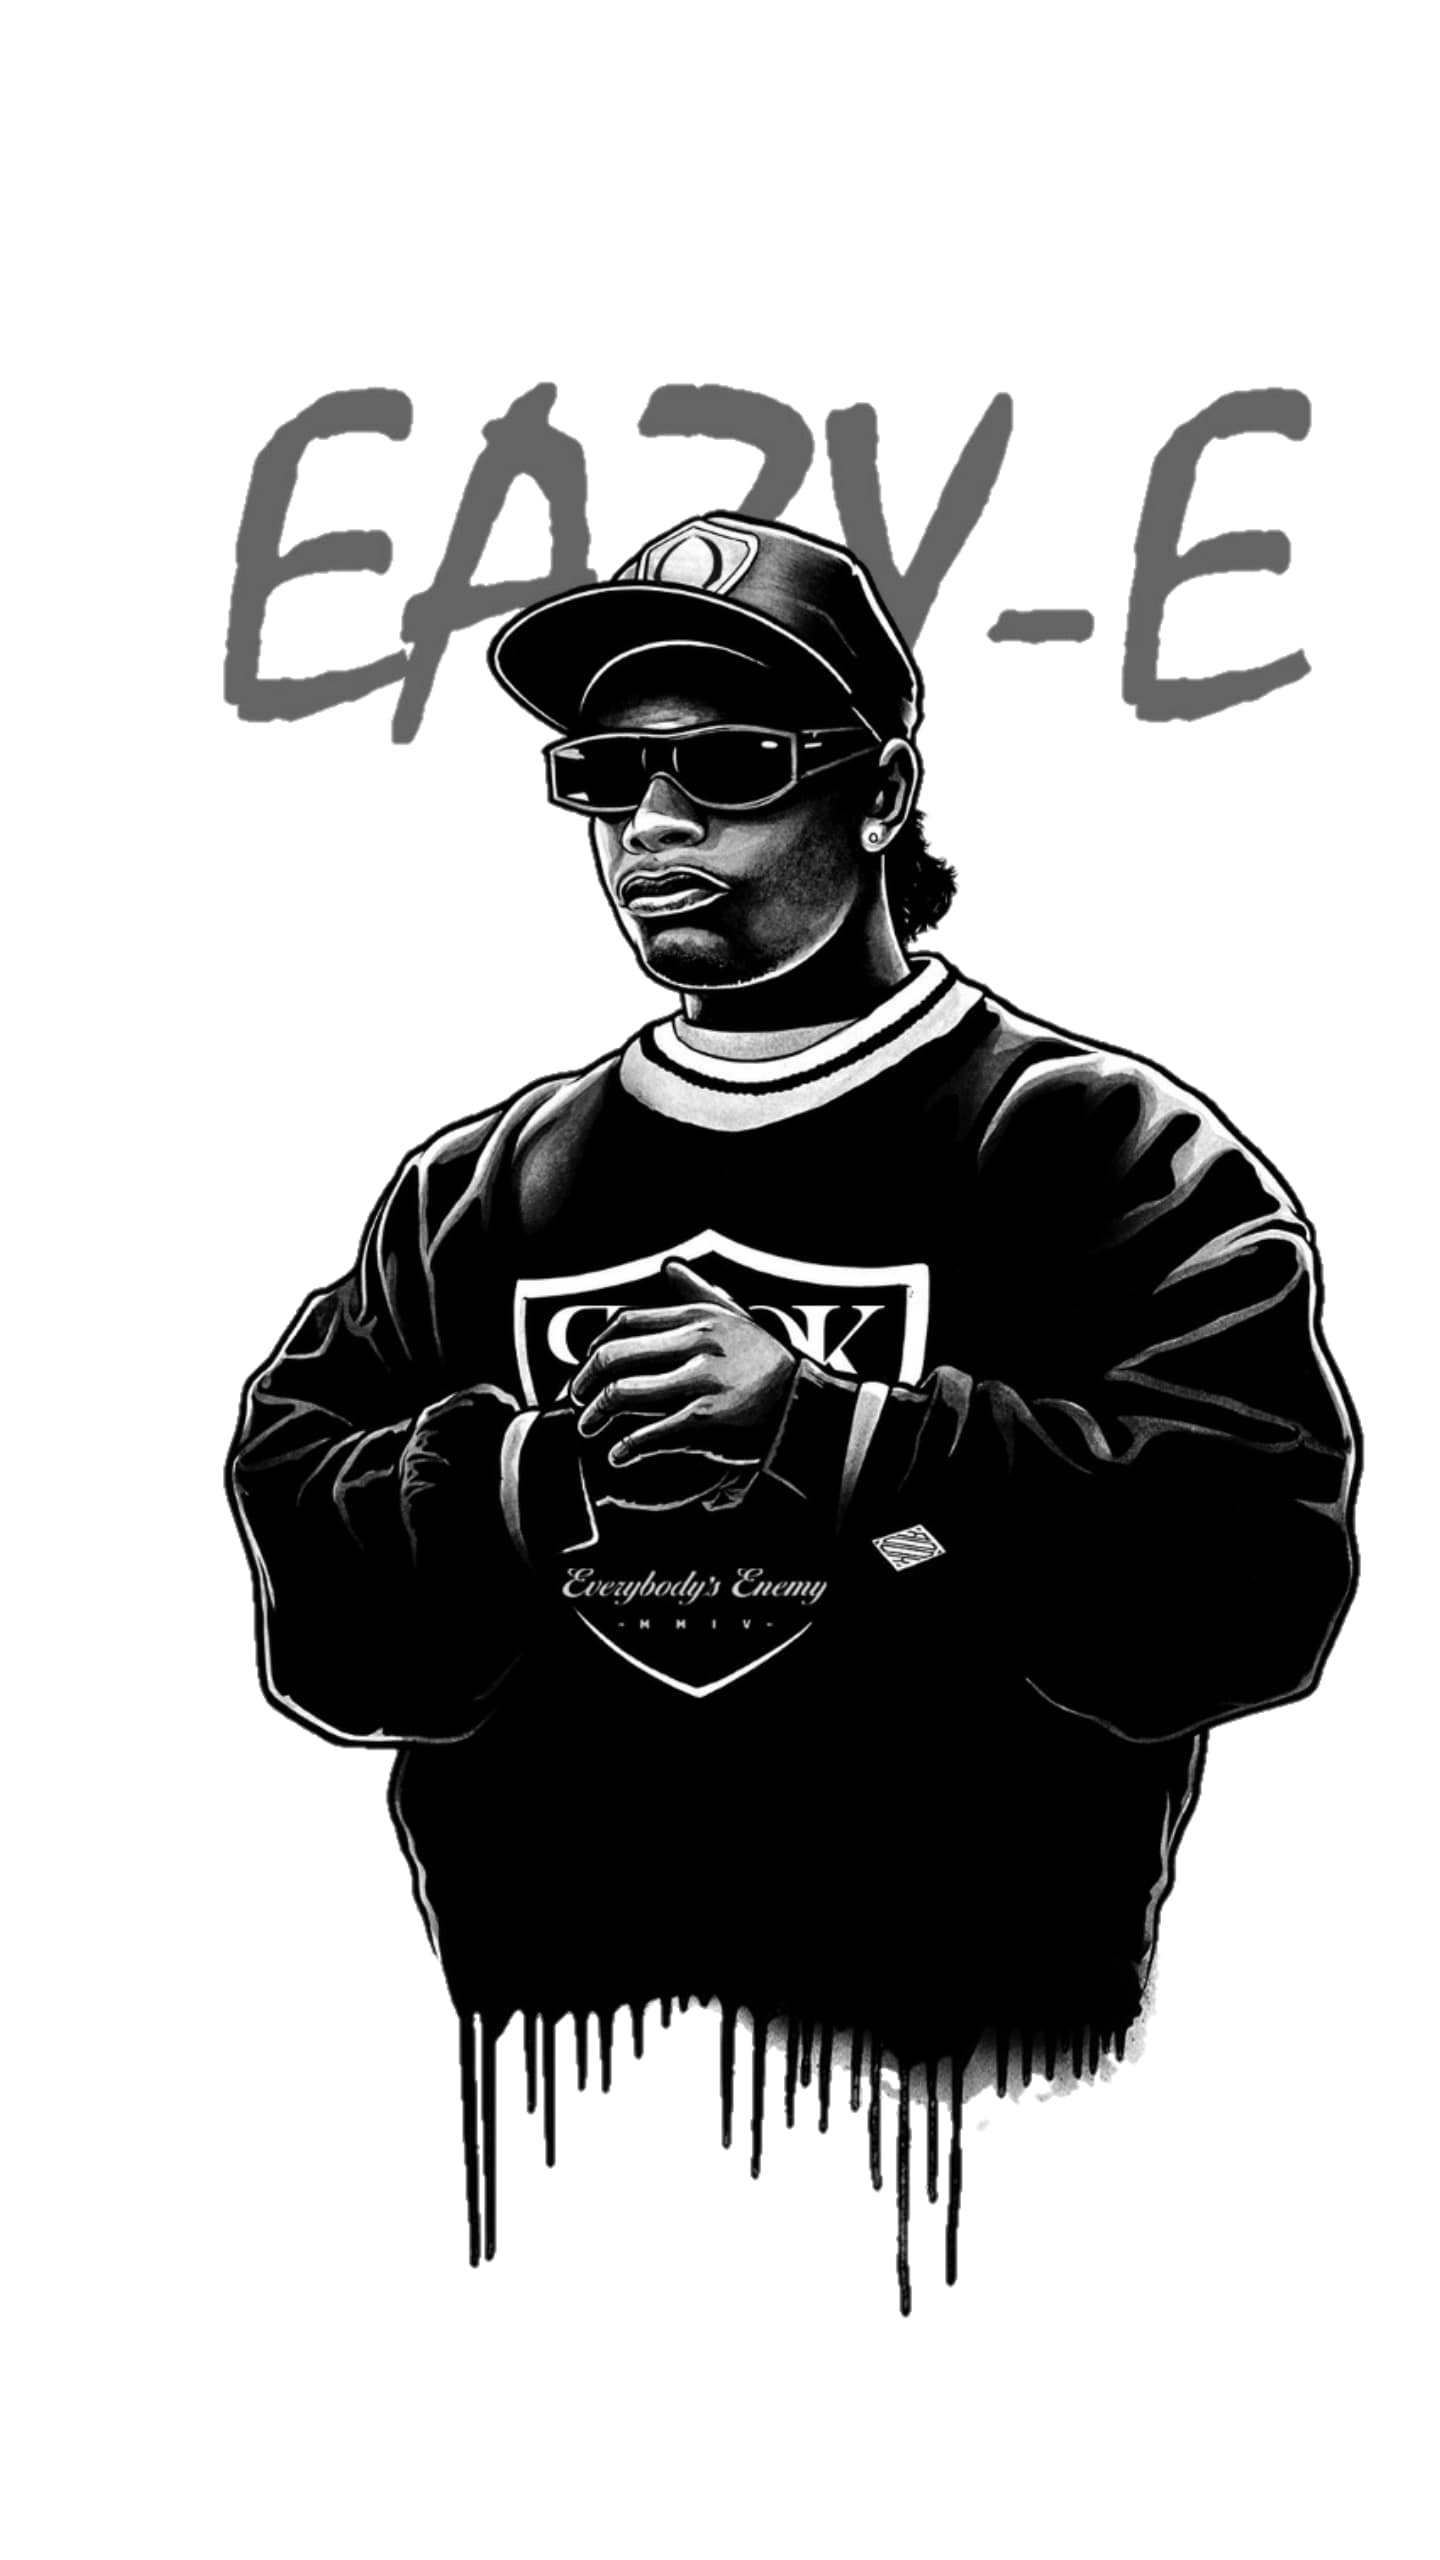 Eazy E wallpapers, Free backgrounds, 1440x2560 HD Phone